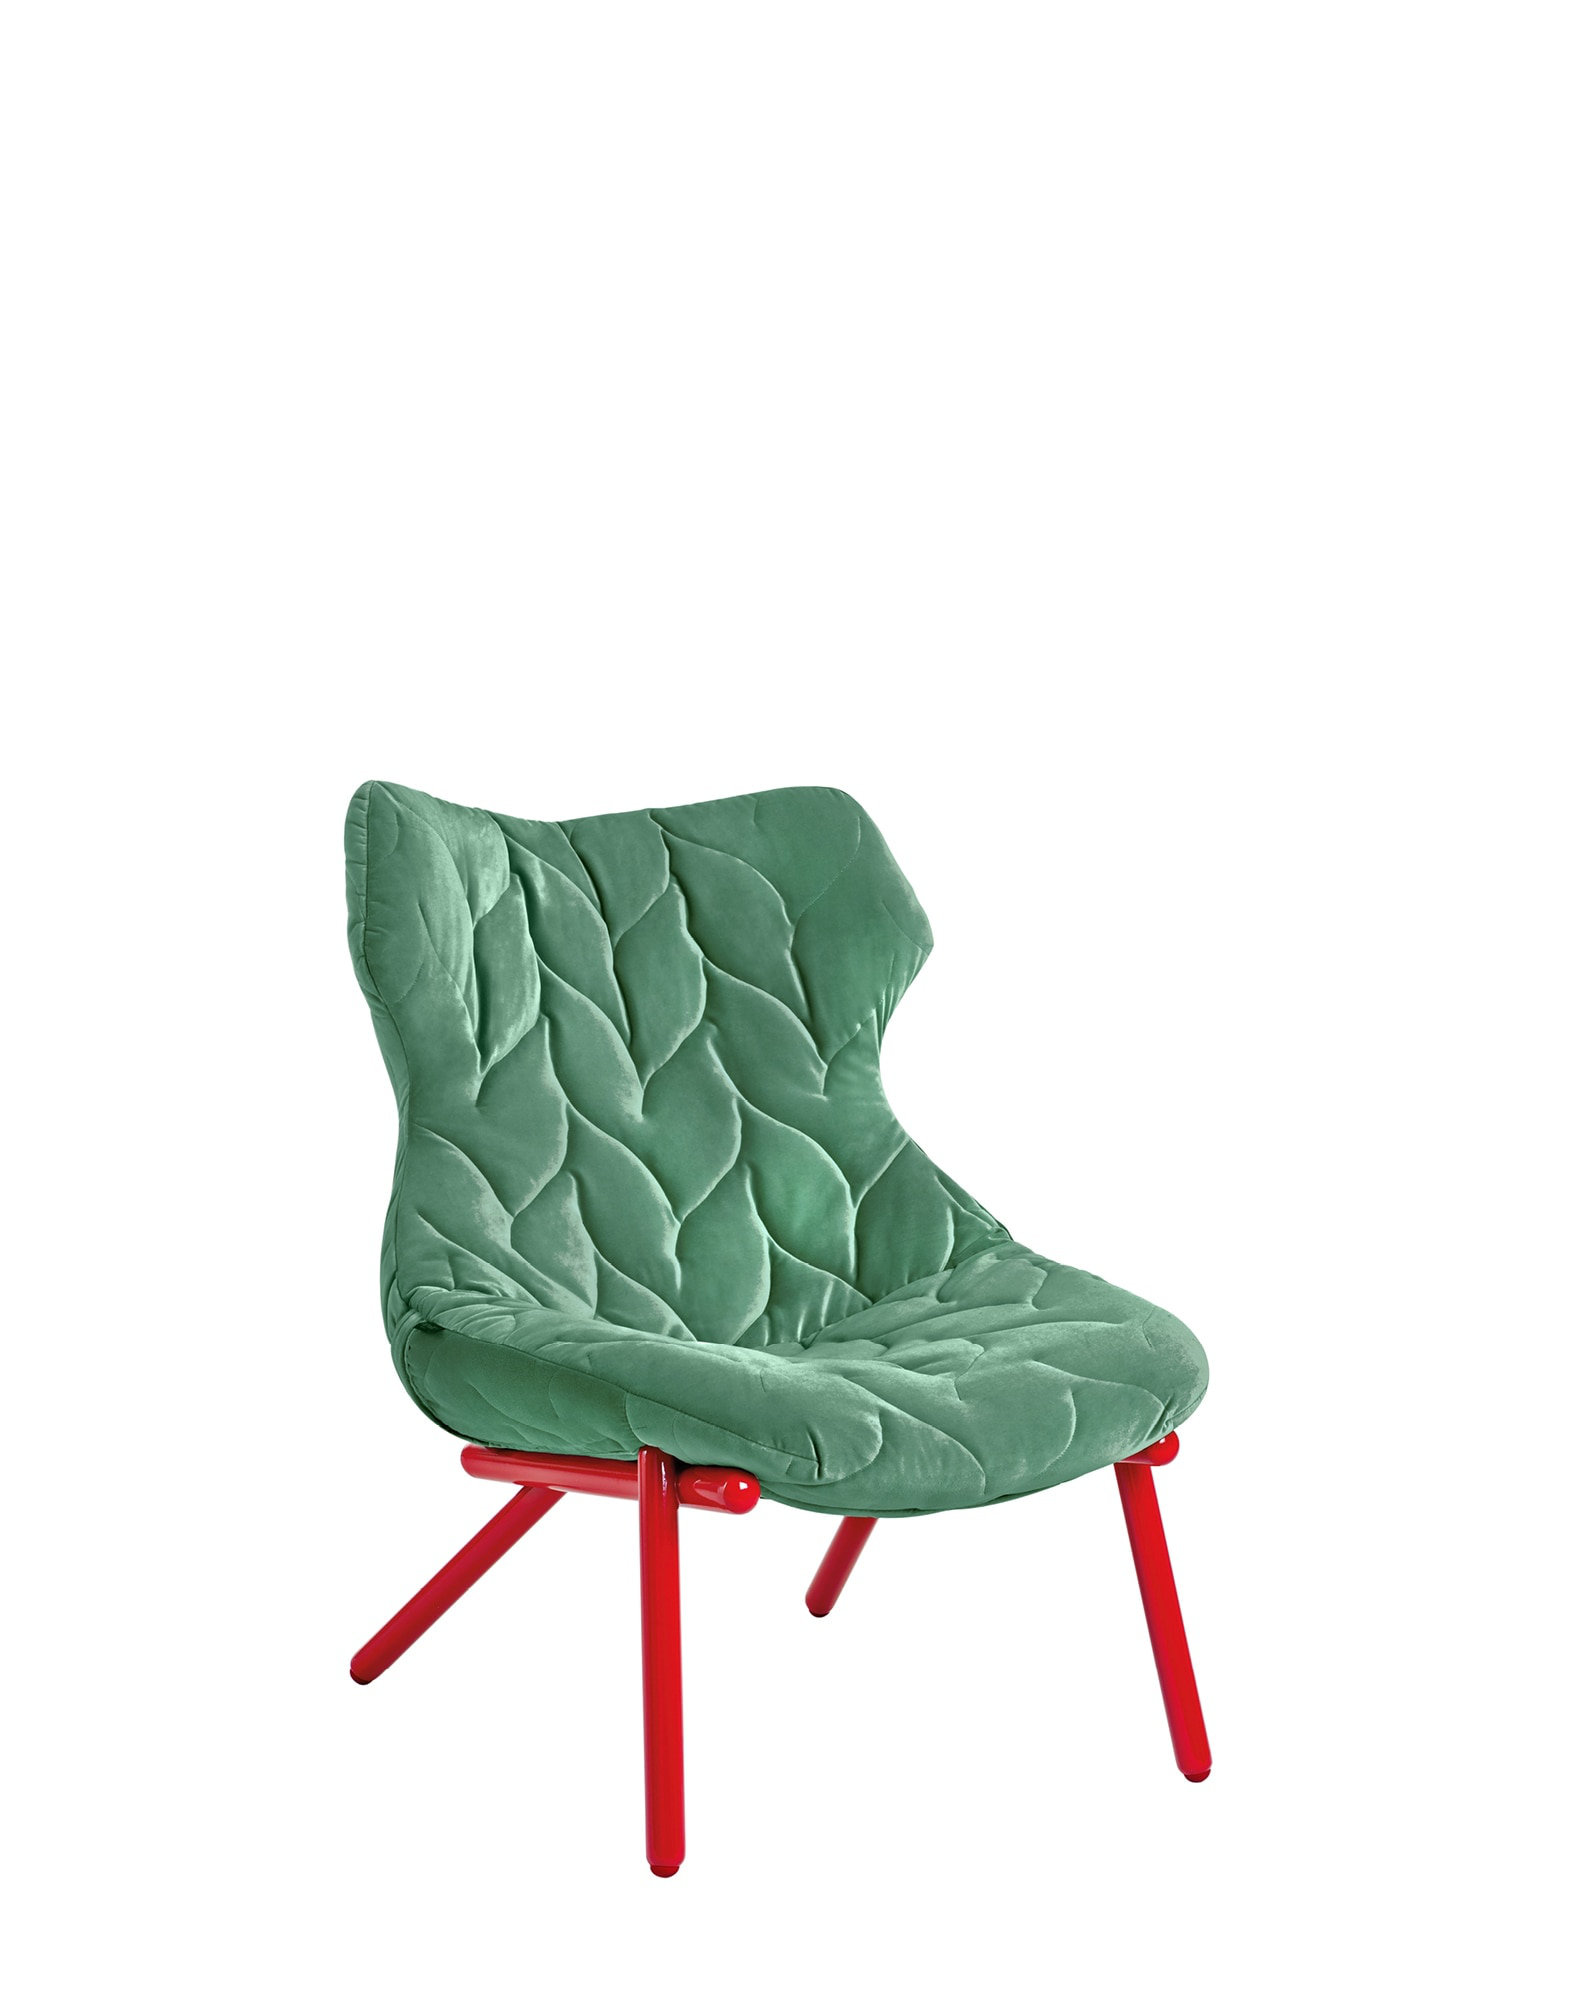 Kartell Foliage Armchair in Forest Green Velvet and Red Legs by